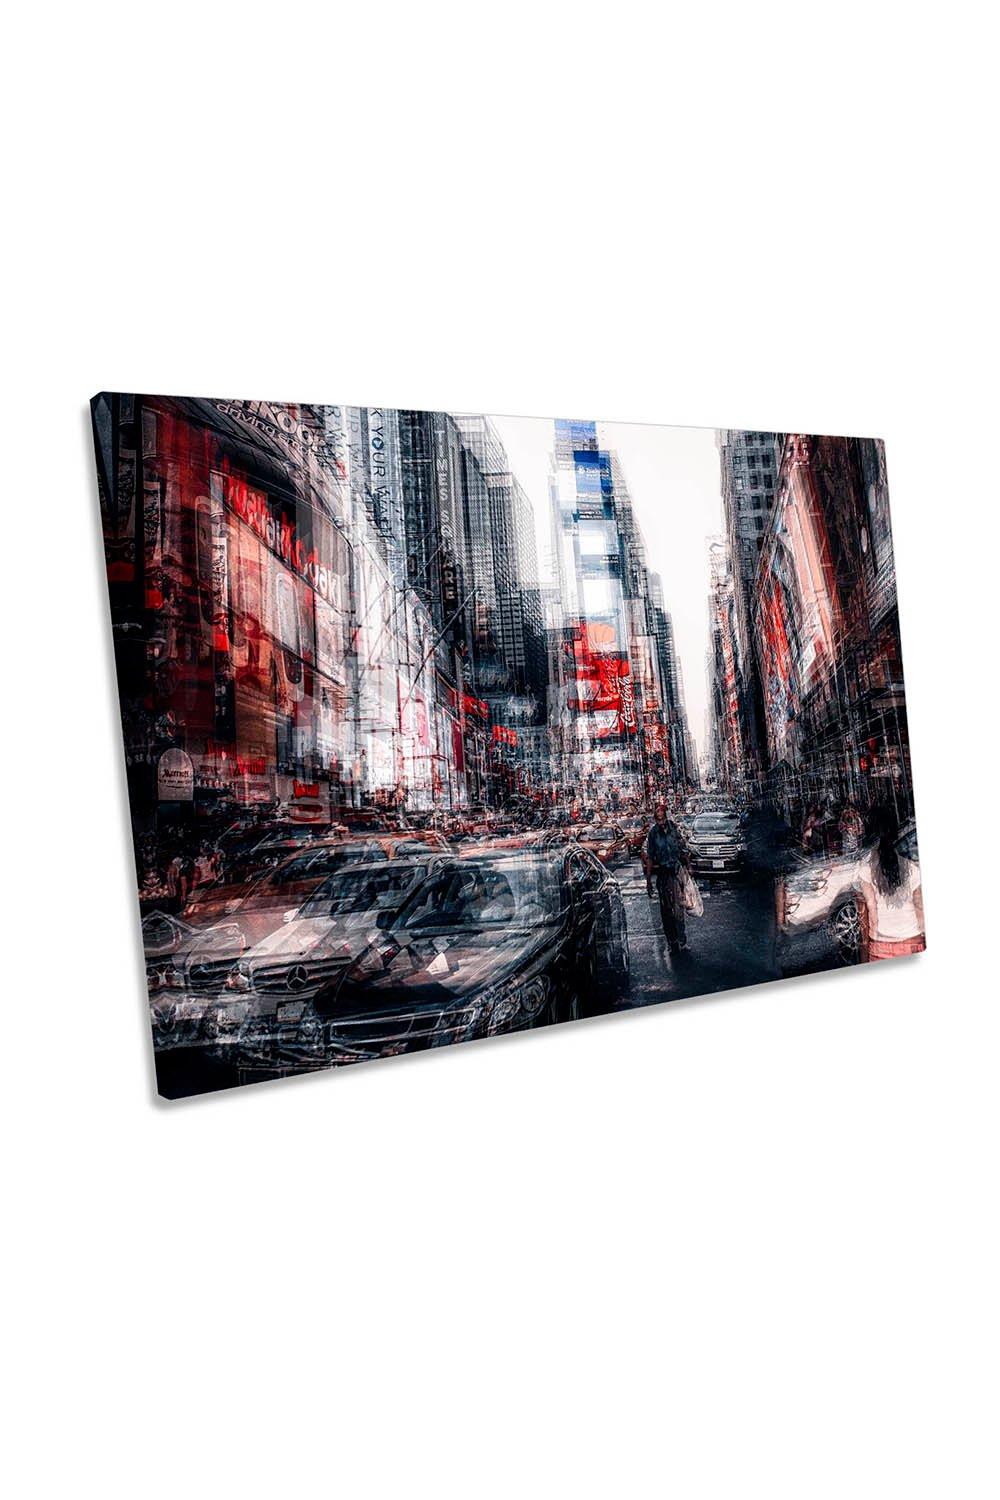 Urban Jungle Times Square New York City Canvas Wall Art Picture Print